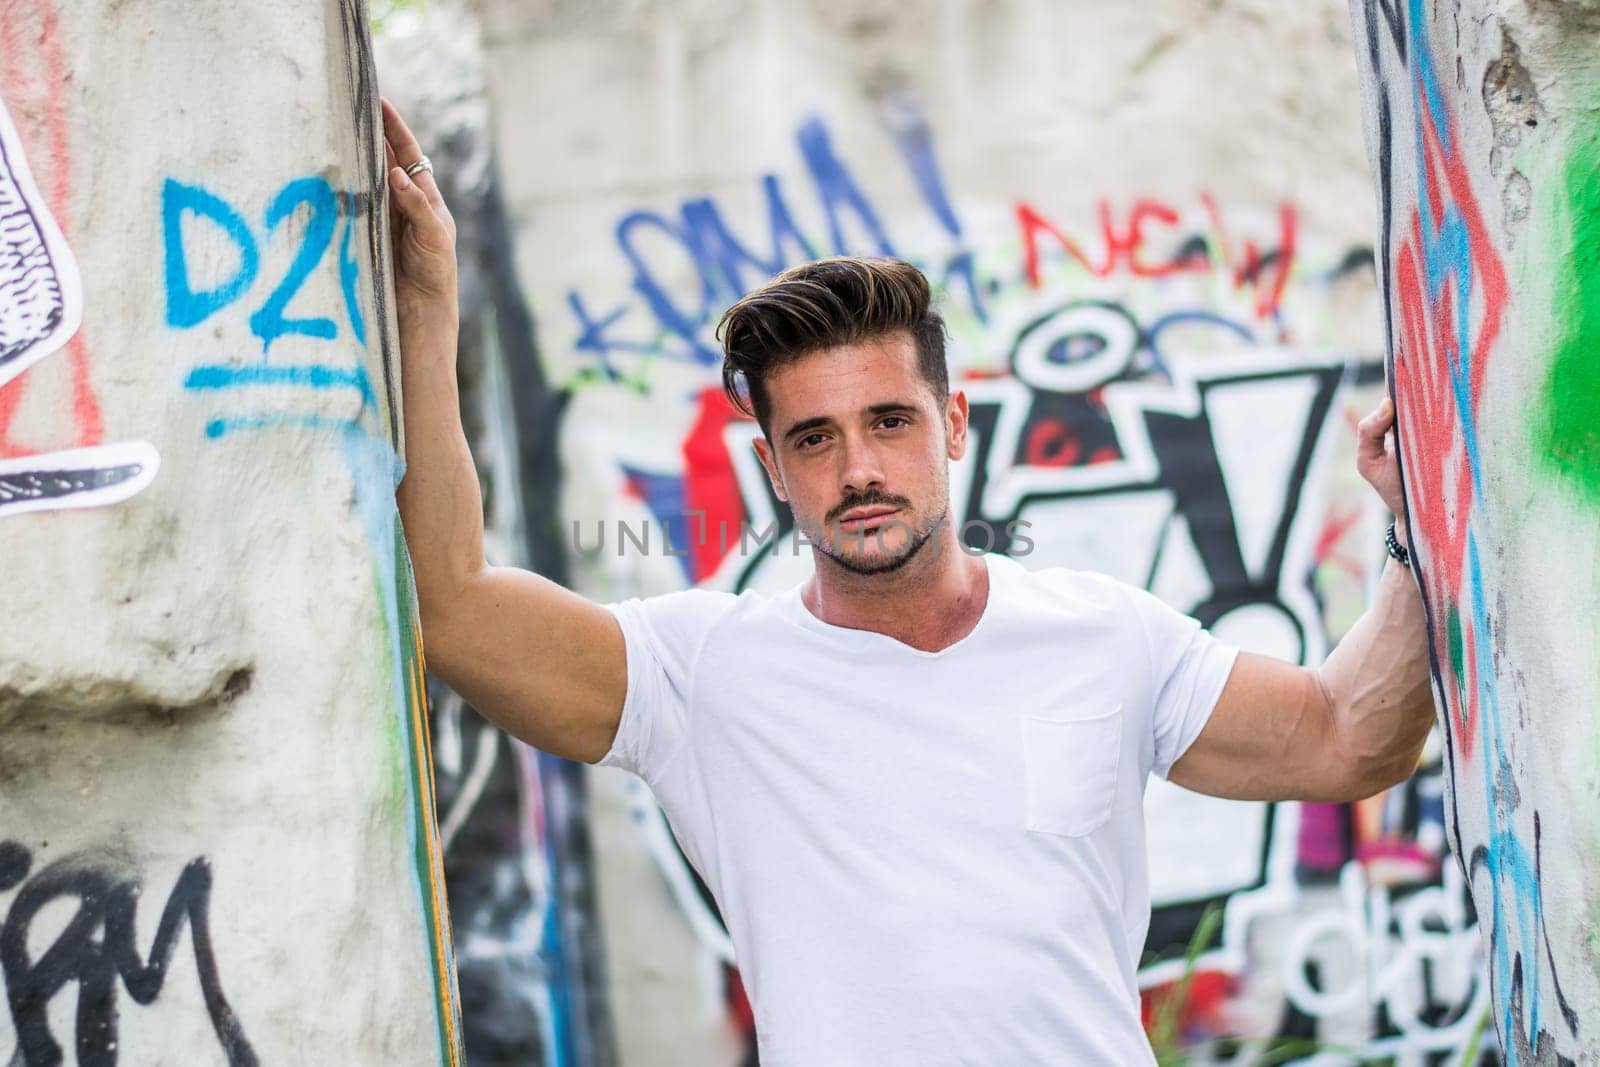 Handsome fit man in white t-shirt outdoor in city setting, looking at camera